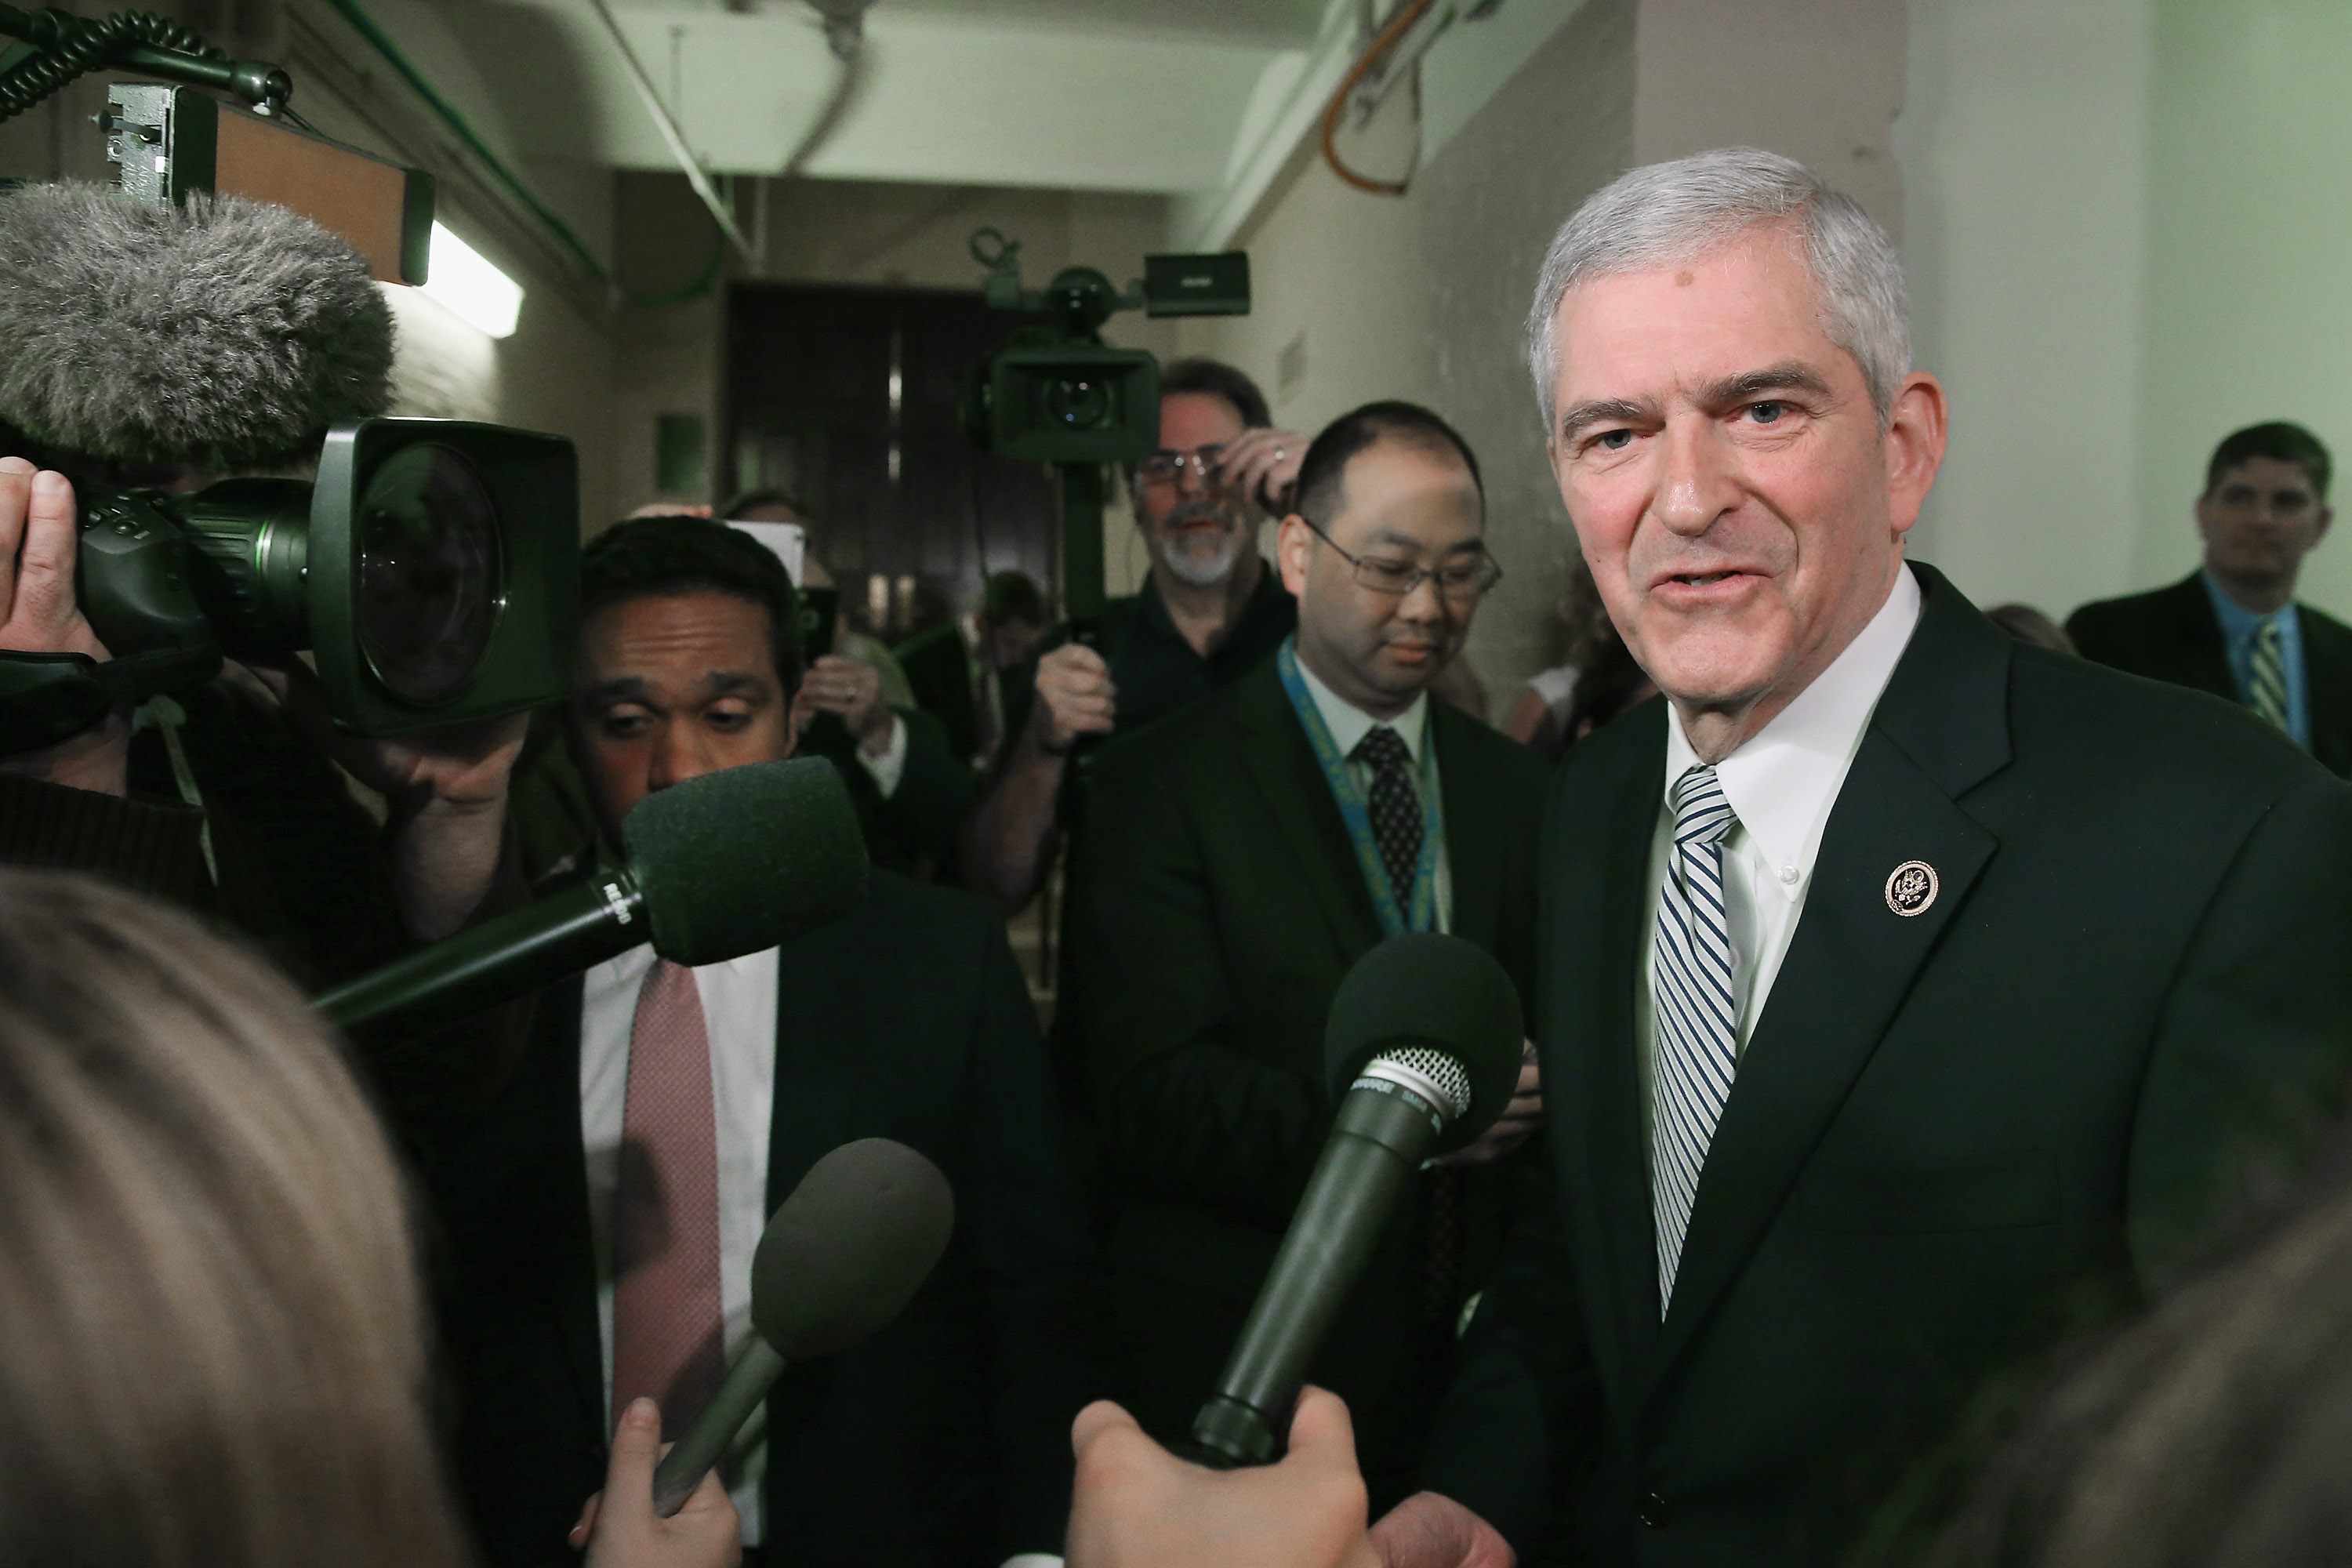 Rep. Daniel Webster talks to a reporters after leaving a House GOP candidates forum at the U.S. Capitol October 28, 2015 in Washington, DC. Chip Somodevilla/Getty Images